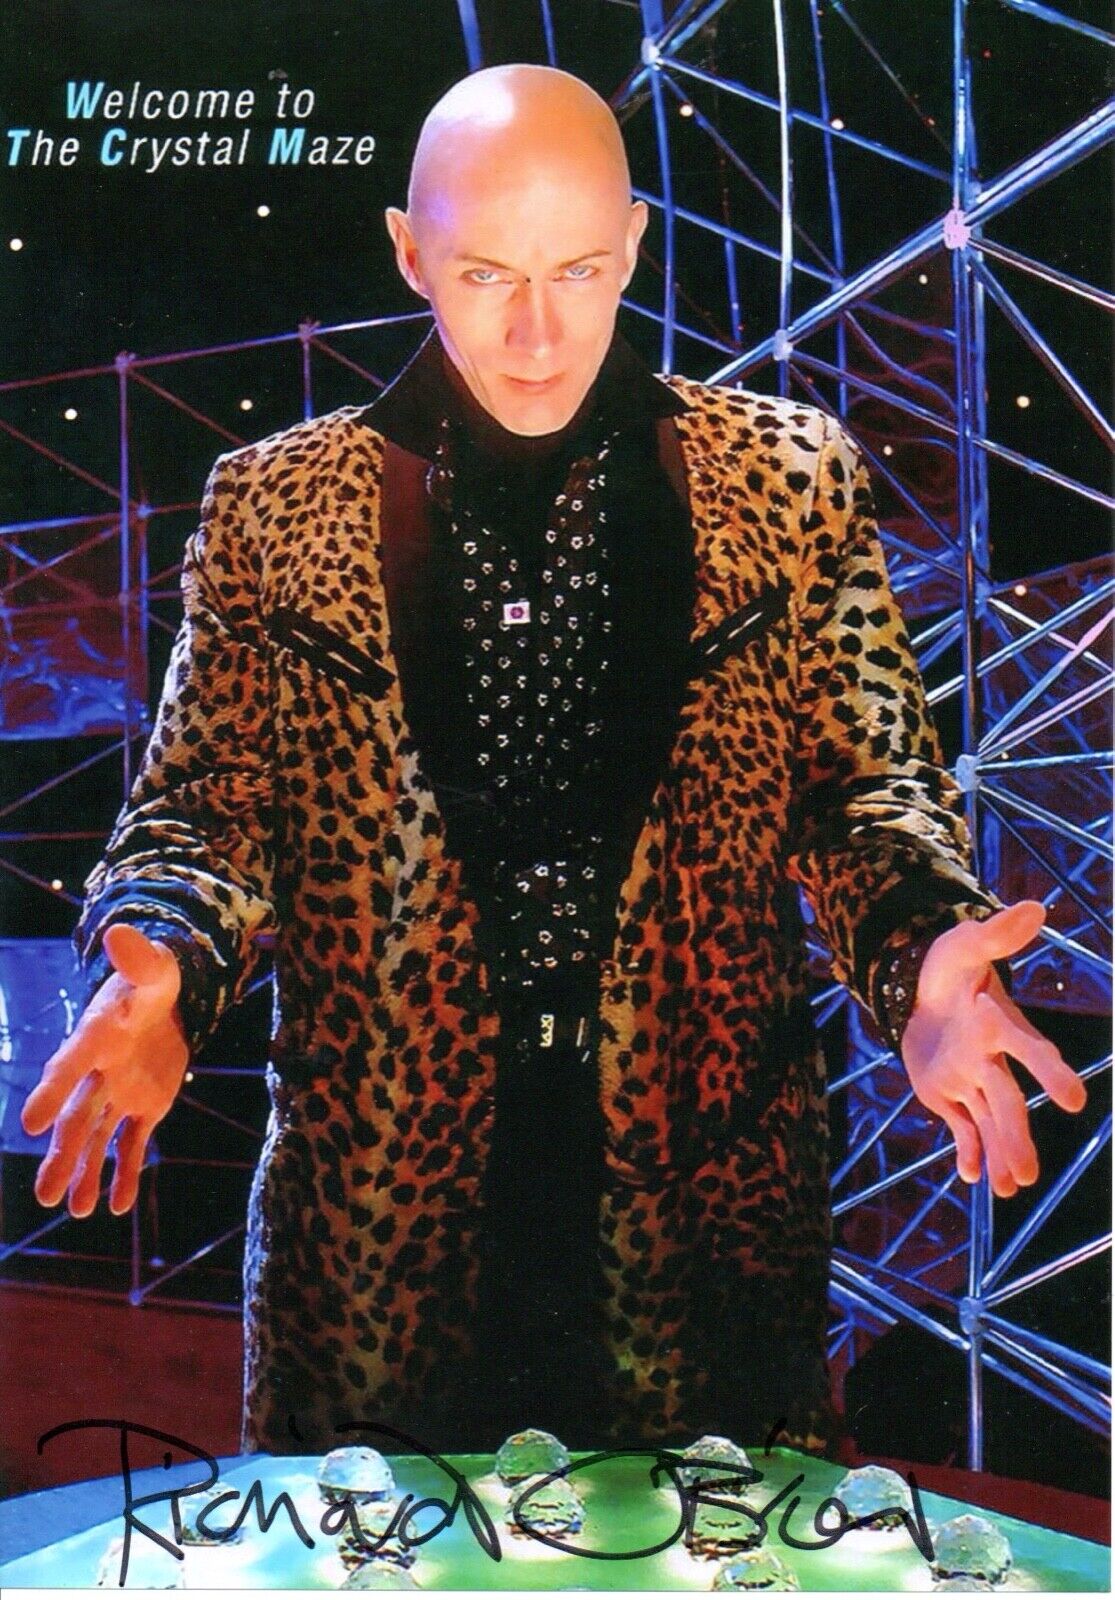 Richard O'Brien HAND SIGNED 8x12 Photo Poster painting Autograph Crystal Maze C/W COA